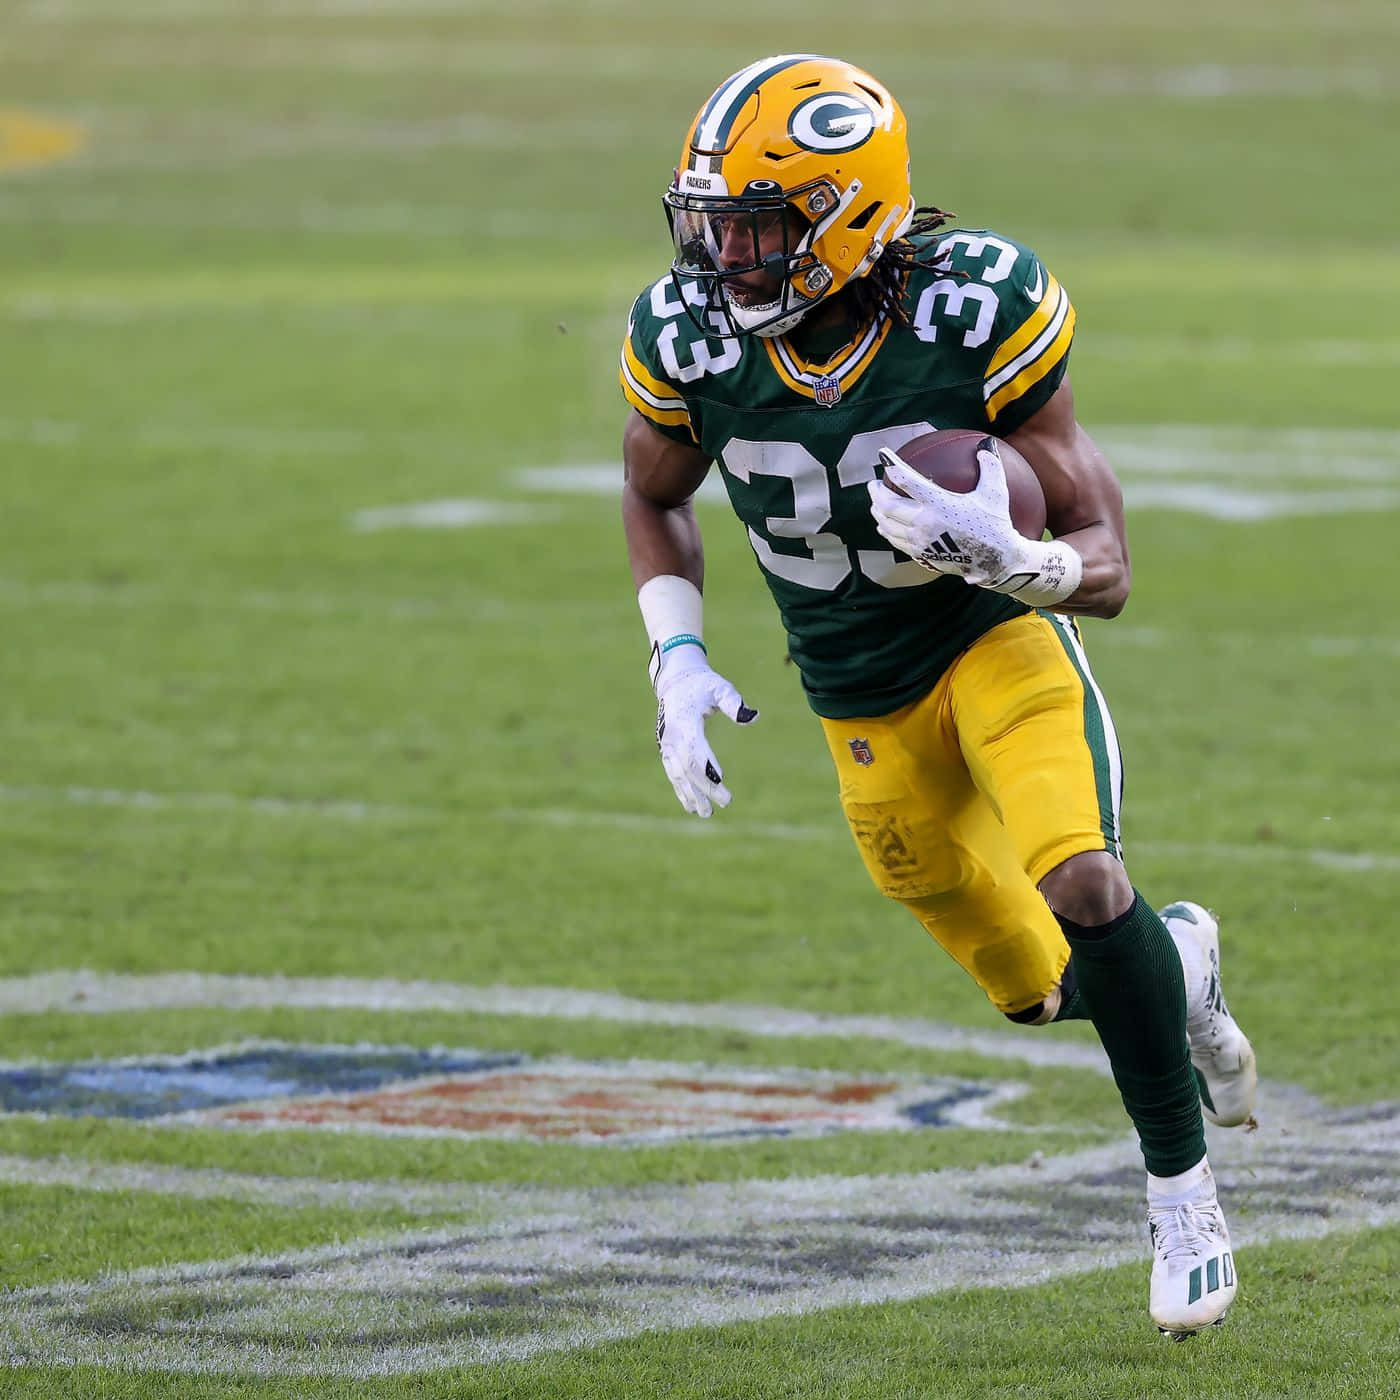 Aaron Jones #12 of the Green Bay Packers running with the ball Wallpaper